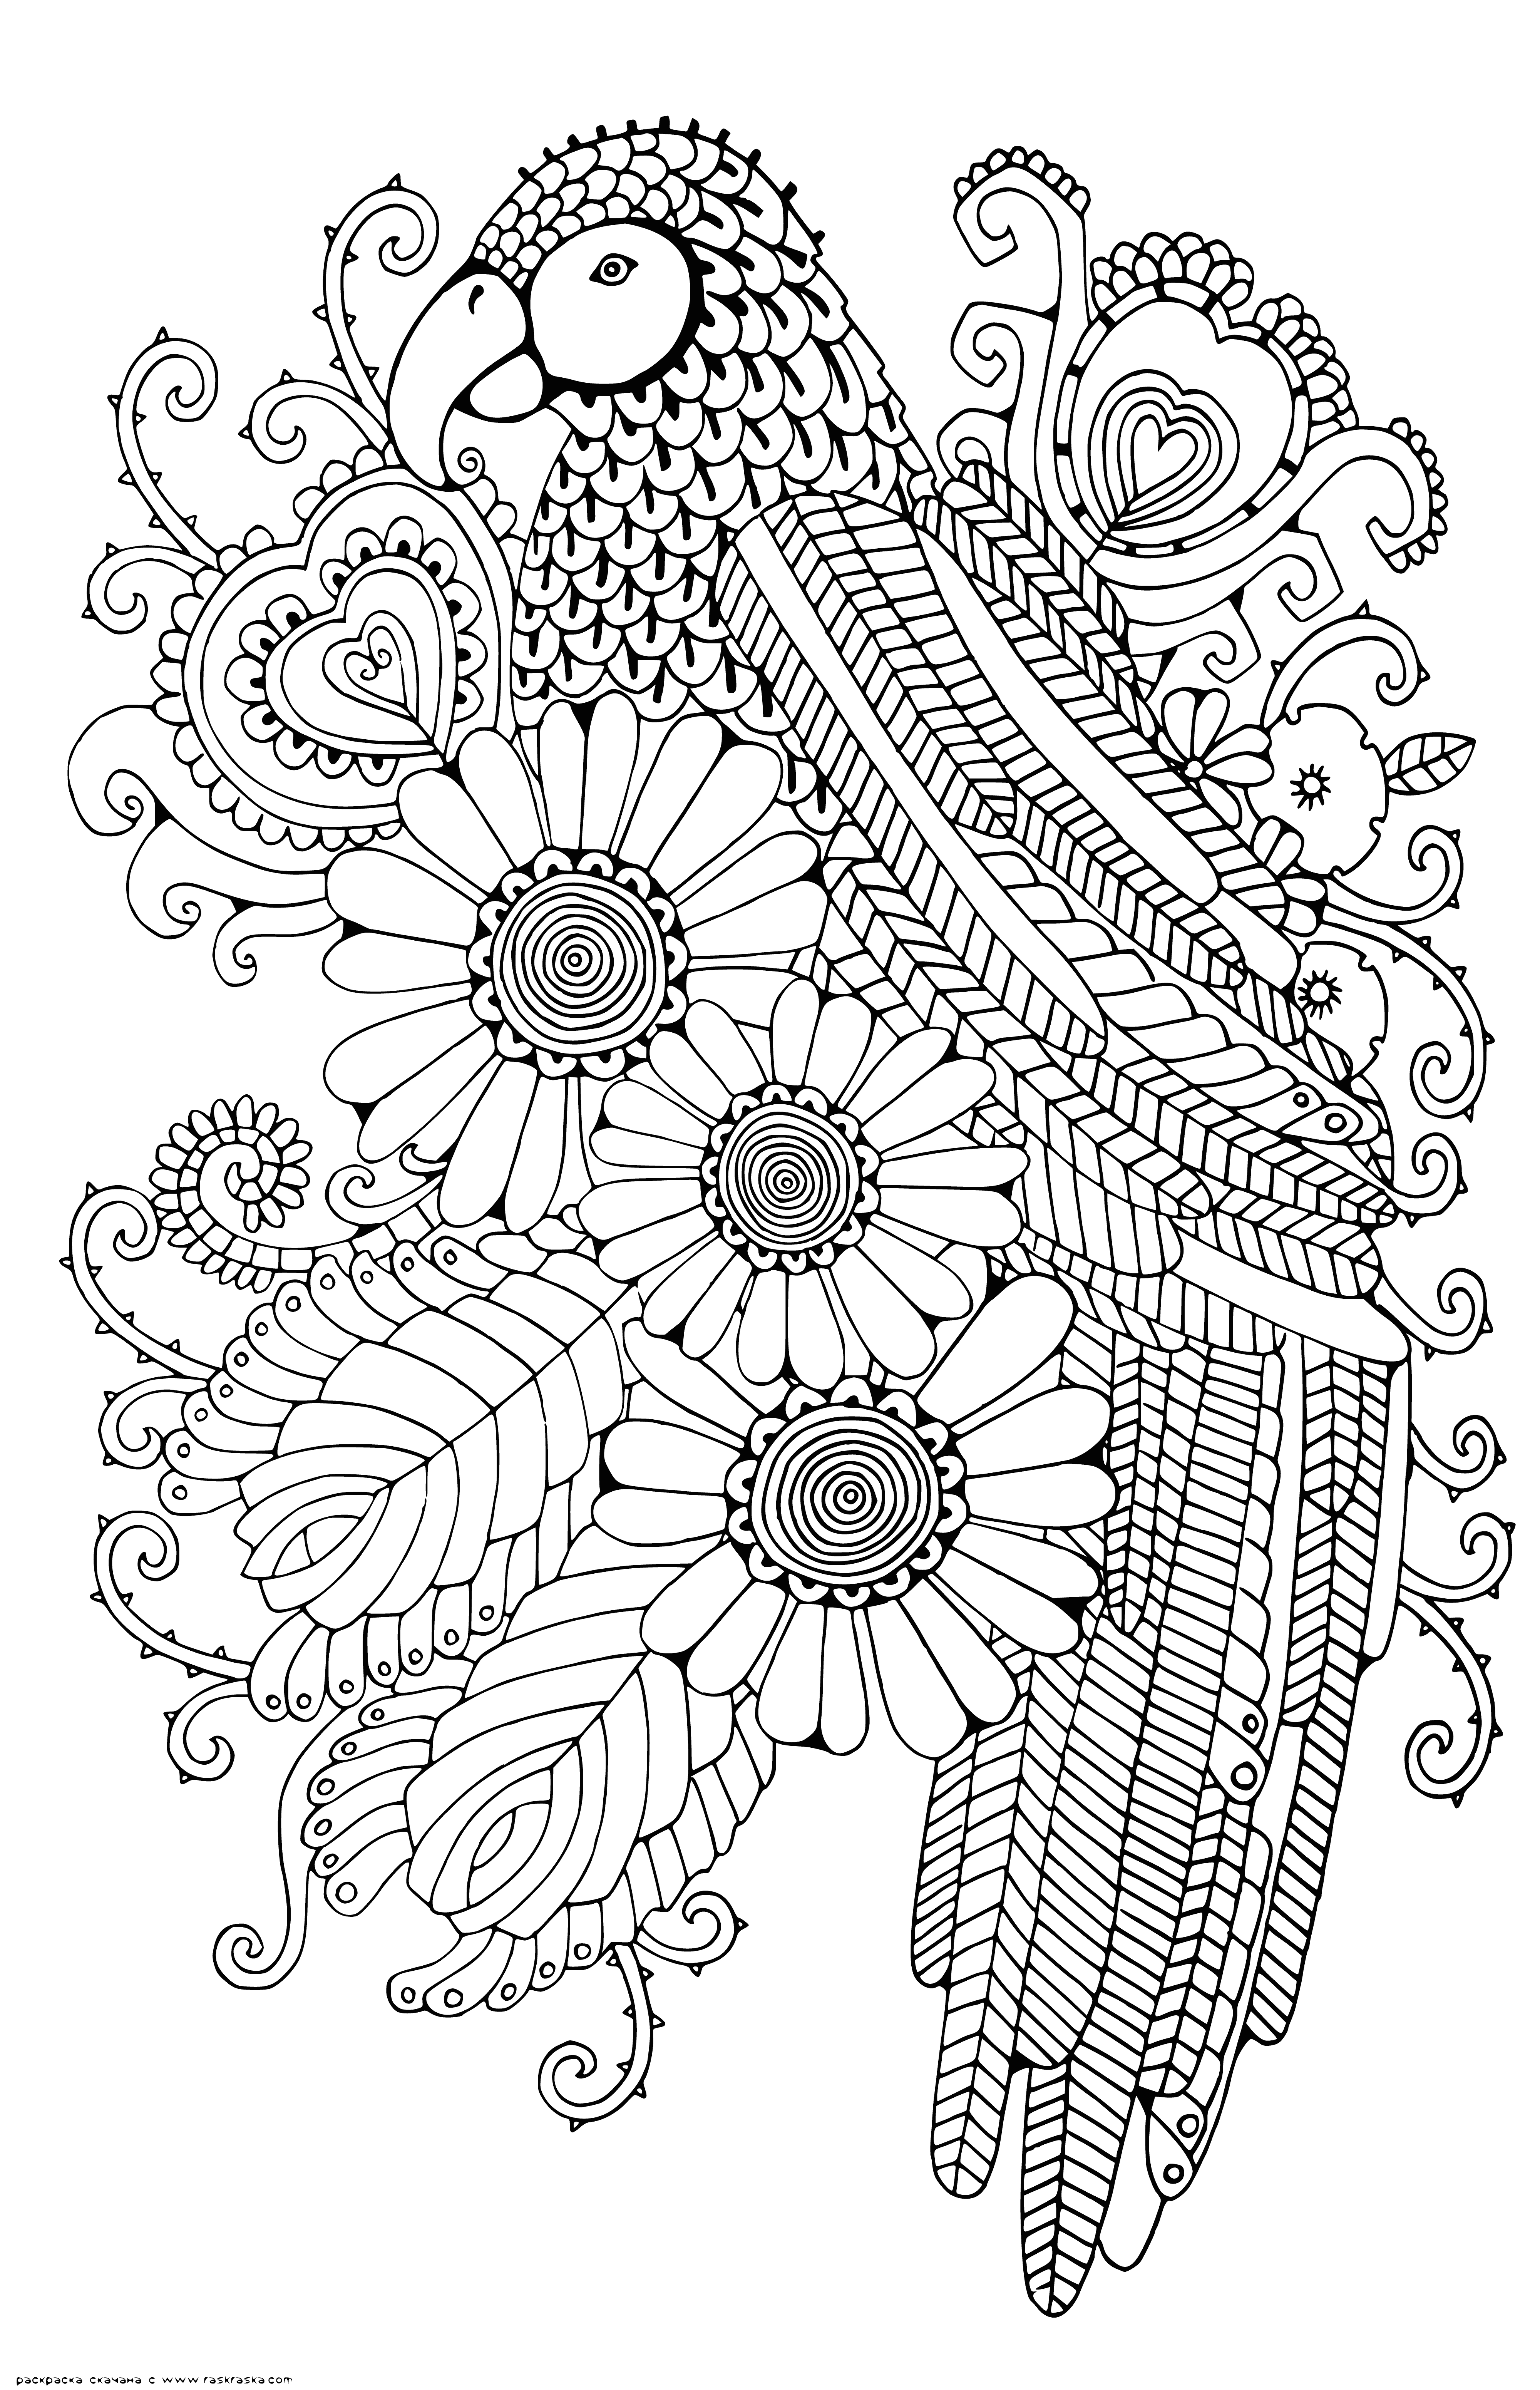 Parrot coloring page